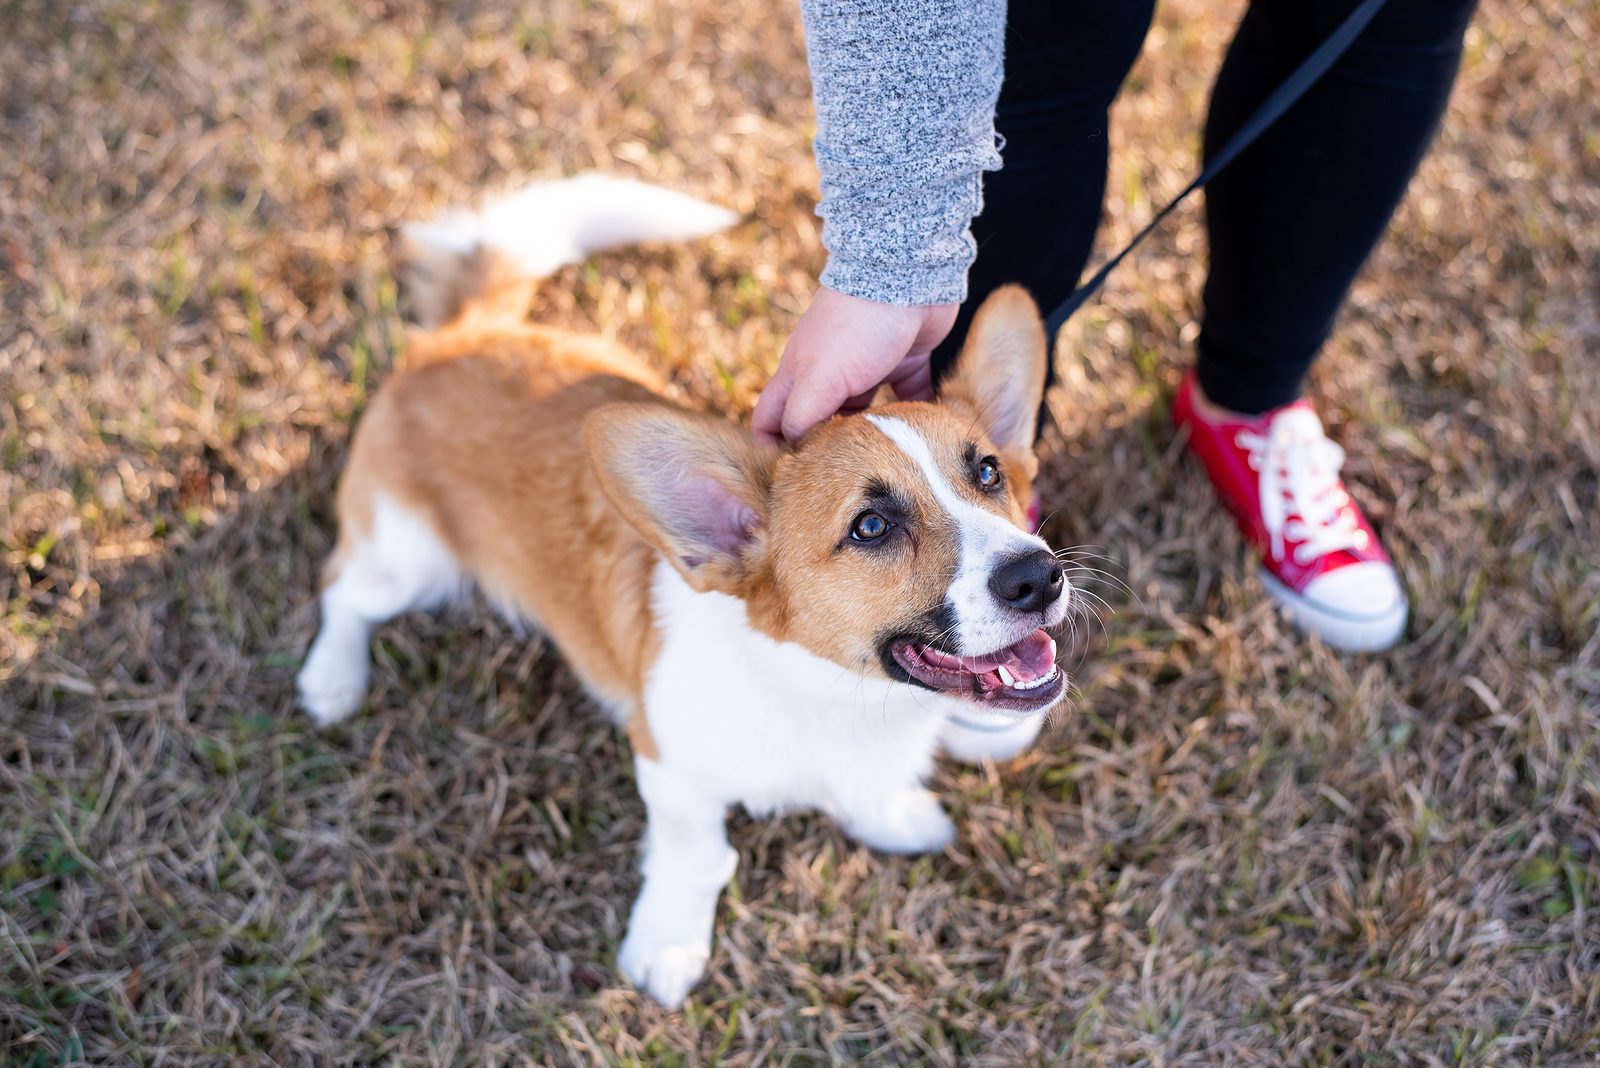 Corgi on leash with owner at a park.